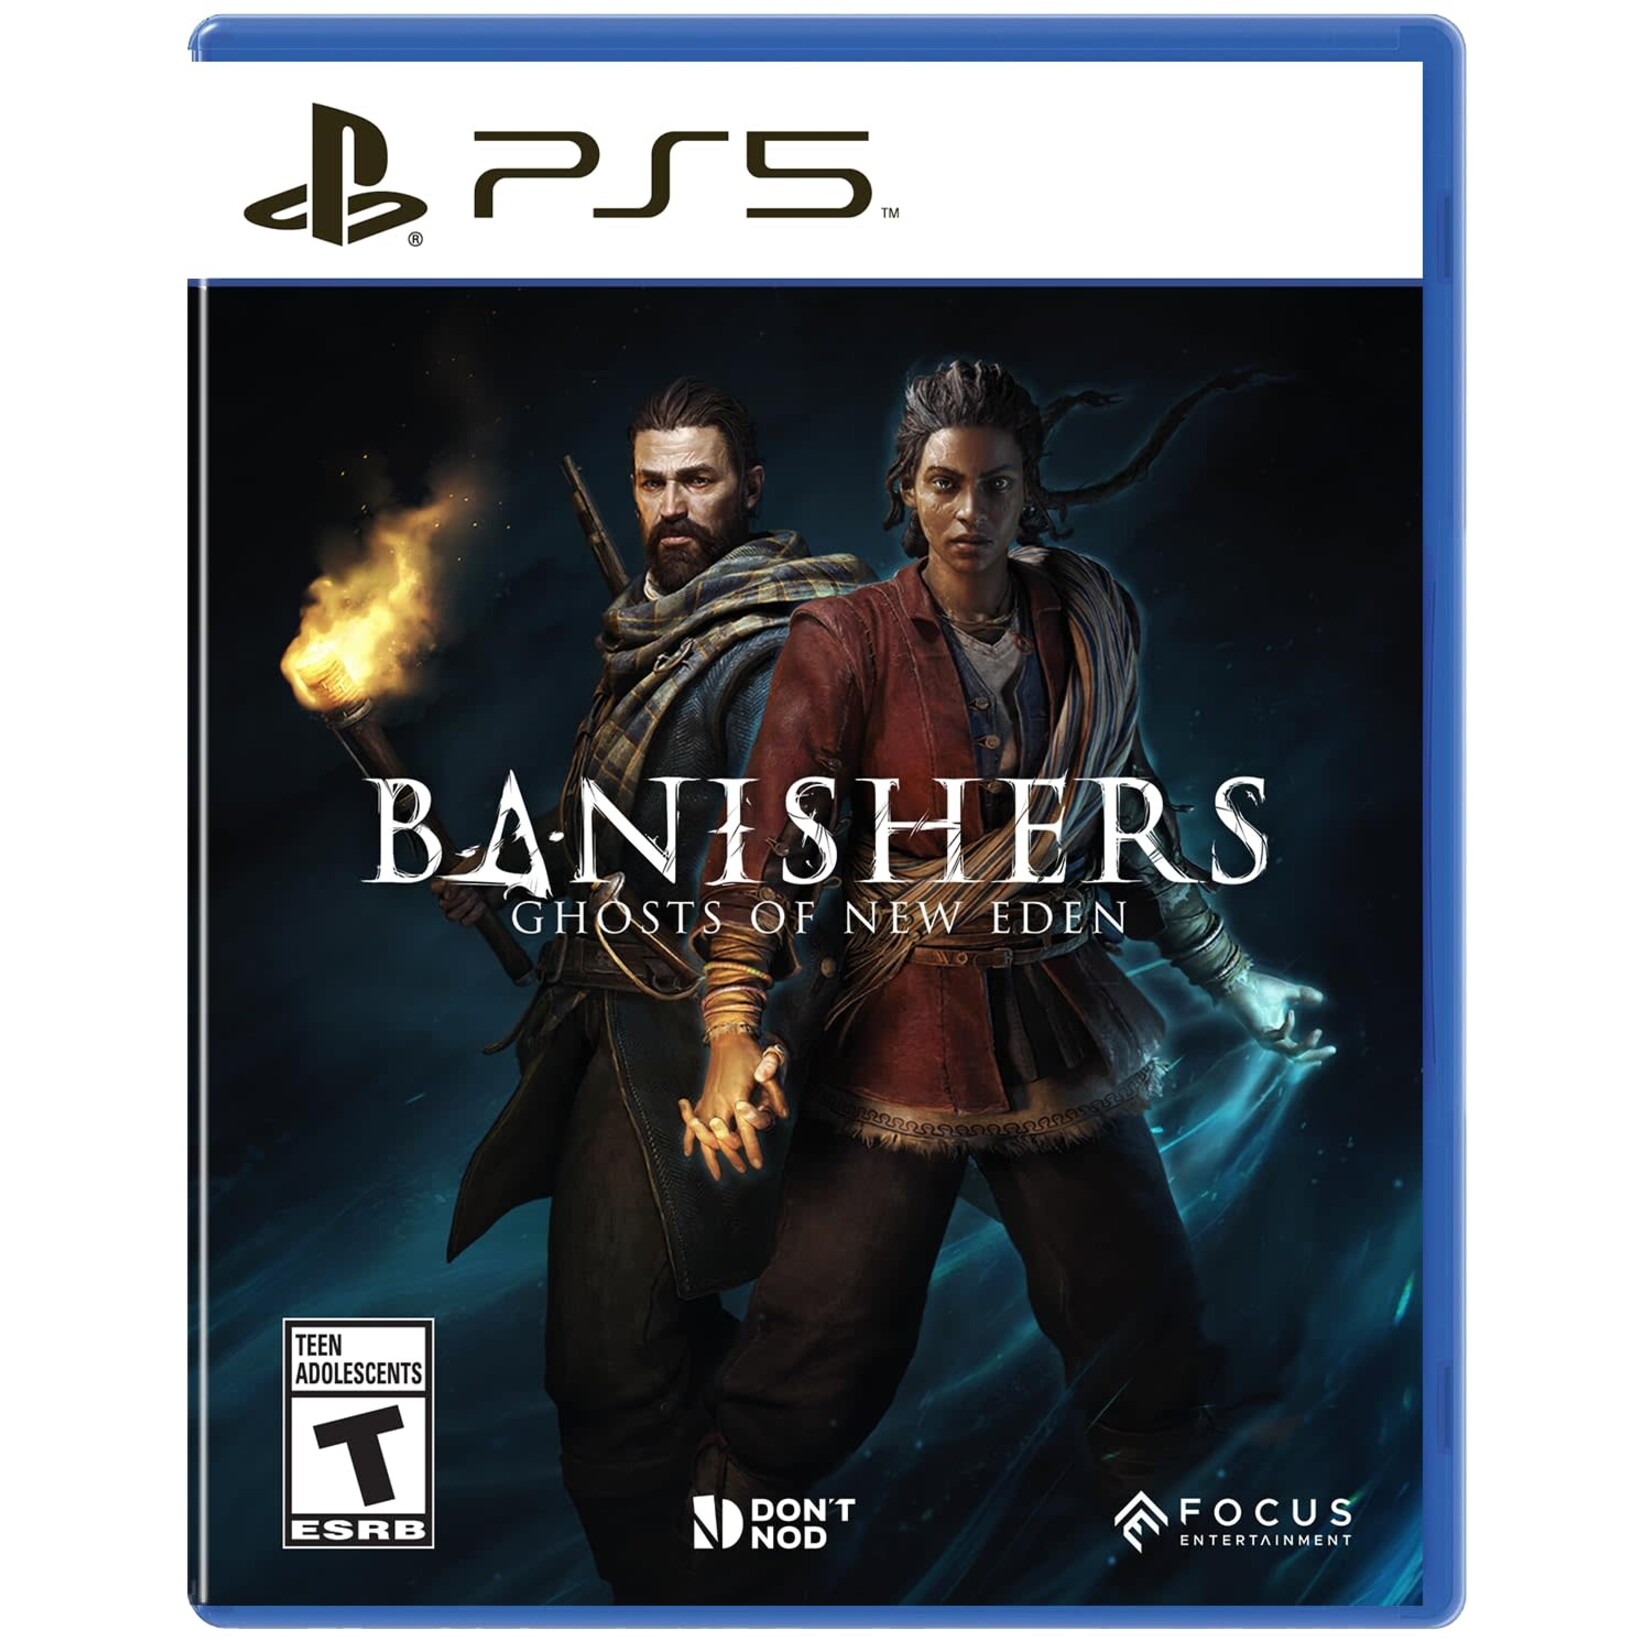 PS5-Banishers: Ghosts of New Eden